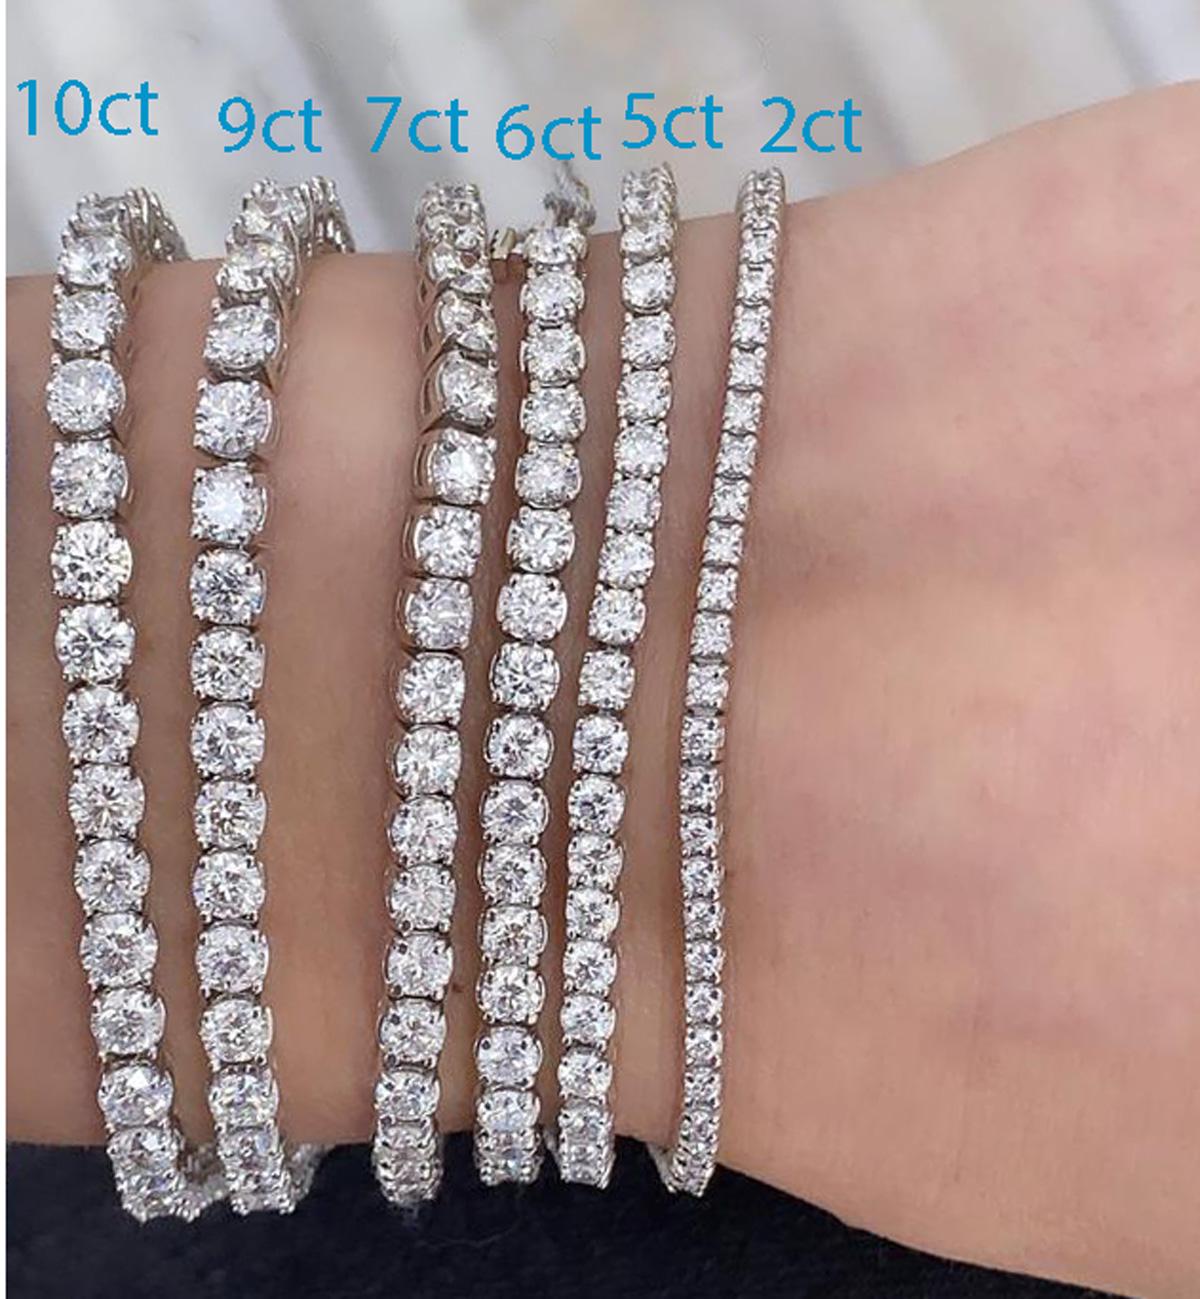 Classic Diamond Tennis Bracelet Different Carat Weight Options 

Price Is shown is for 6 inch. ask for a price in your wrist size or other carat weights. Can also make in yellow gold.

Can be sized to any wrist size, this bracelet will be made to